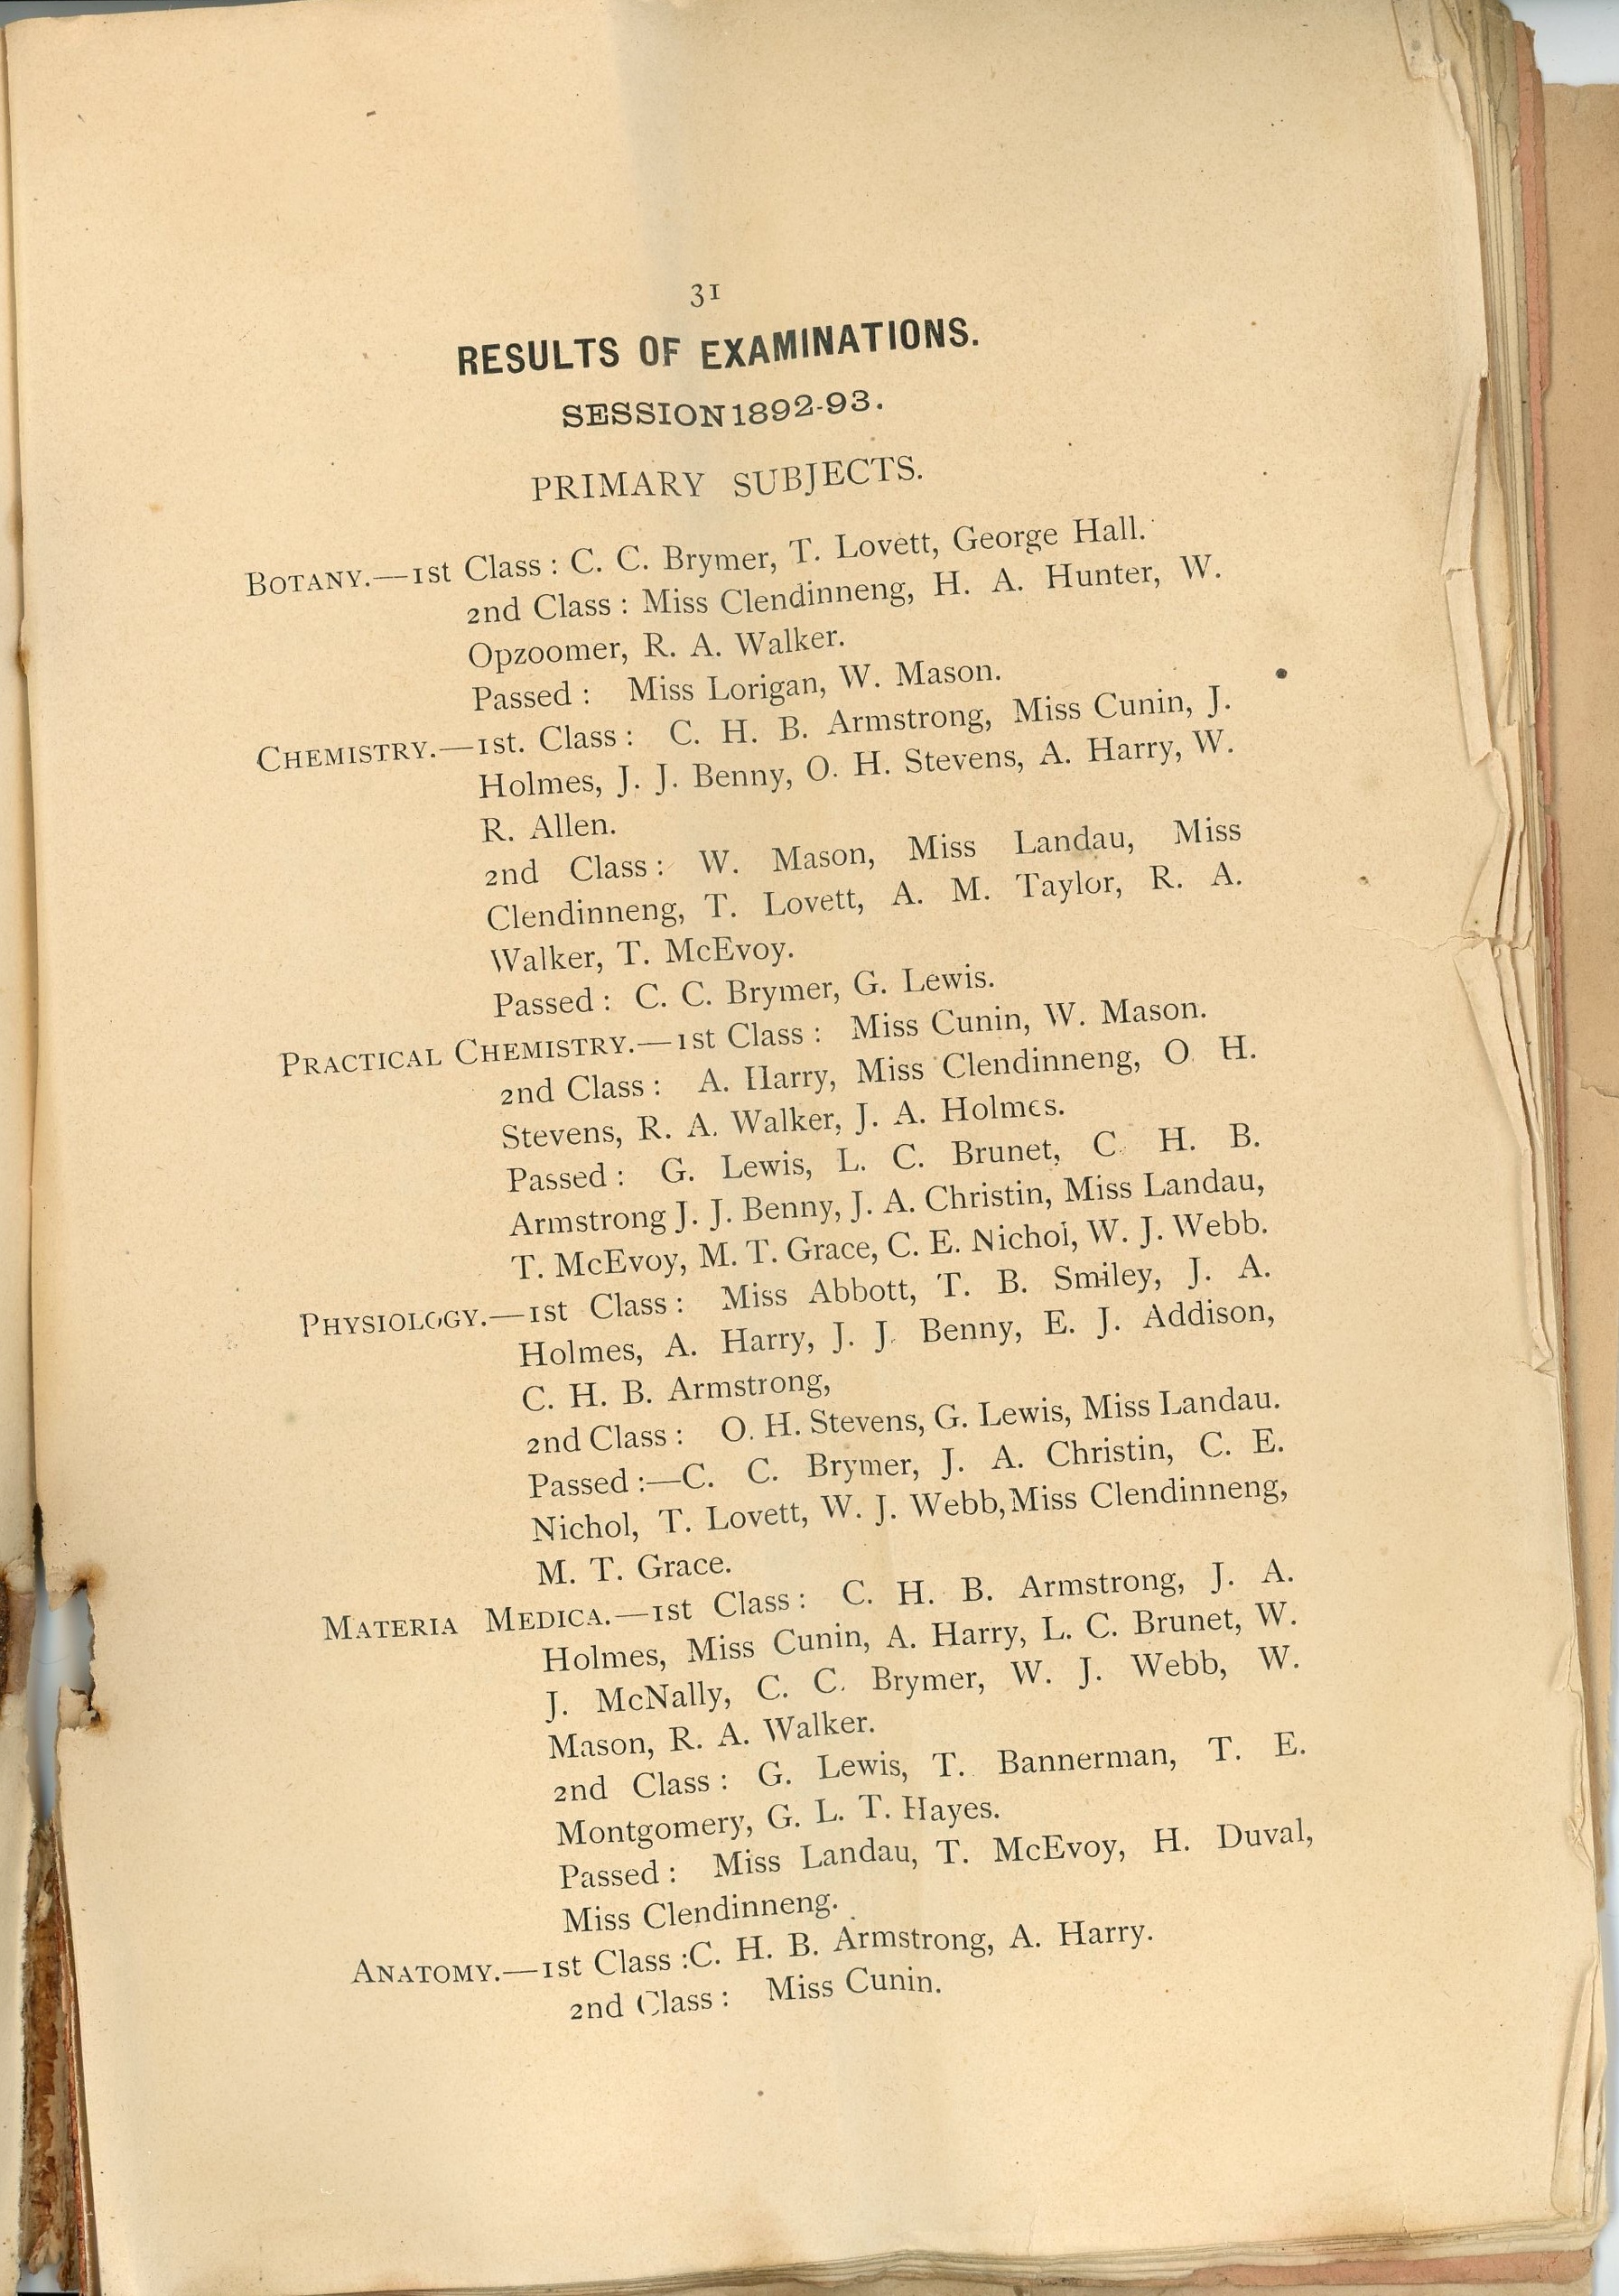 Page 31 of the University of Bishop’s Collage booklet, sepia. It presents the examination results for the 1892-93 session by primary subject. The page title reads: “31 Results of Examinations Session 1892-93. Primary Subjects”. The subjects listed on this page are: “Botany”, “Chemistry”, “Practical Chemistry”, “Physiology”, “Materia Medica” and “Anatomy”. Maude Abbott’s name (Miss Abbott) can be found under “Physiology, 1st class honors”.